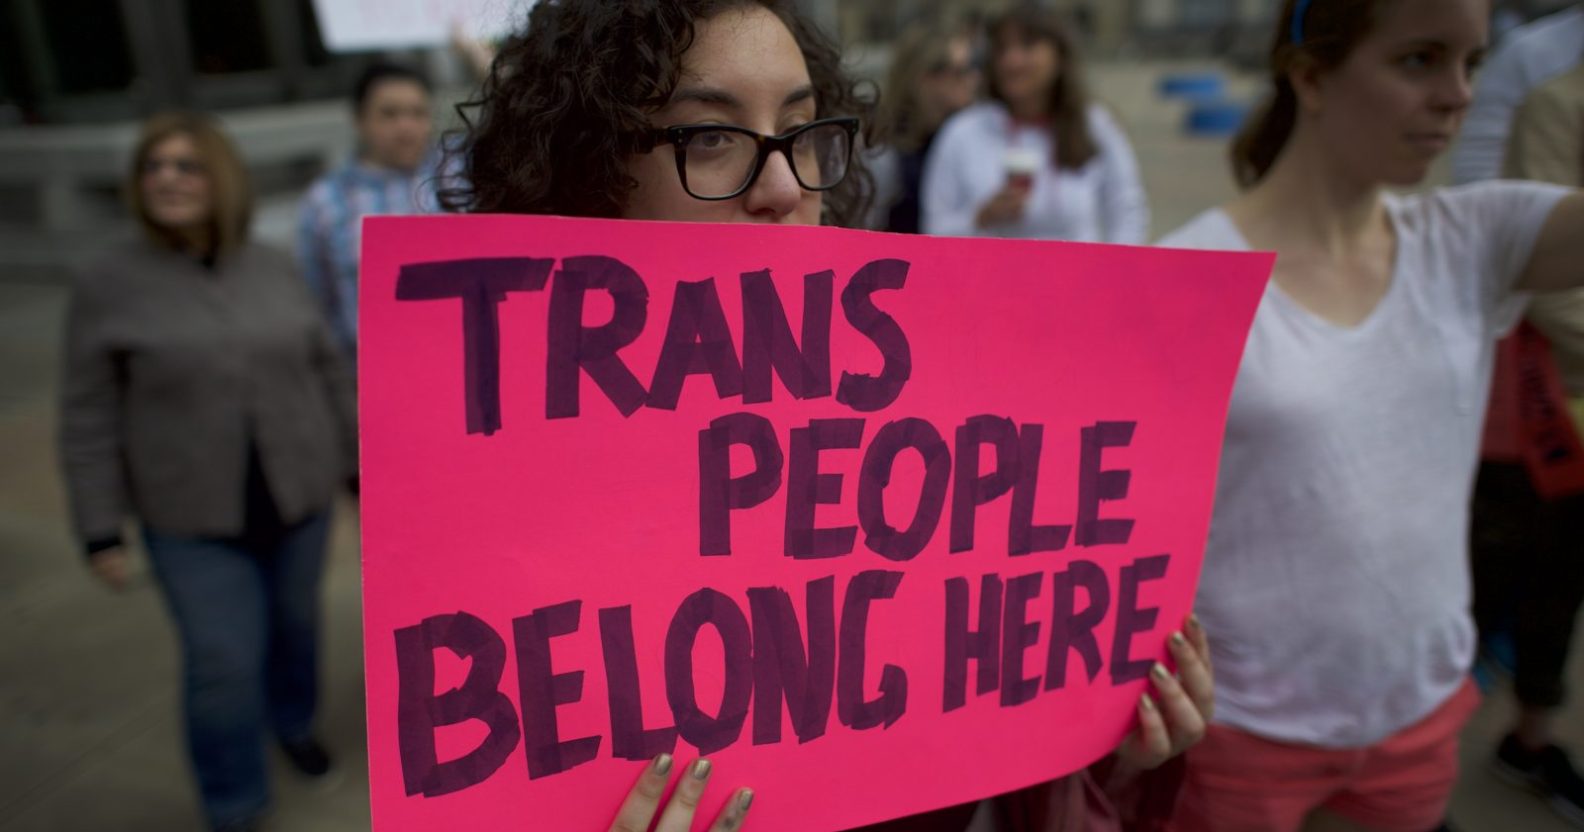 Shemale: Why you should never use this anti-trans slur